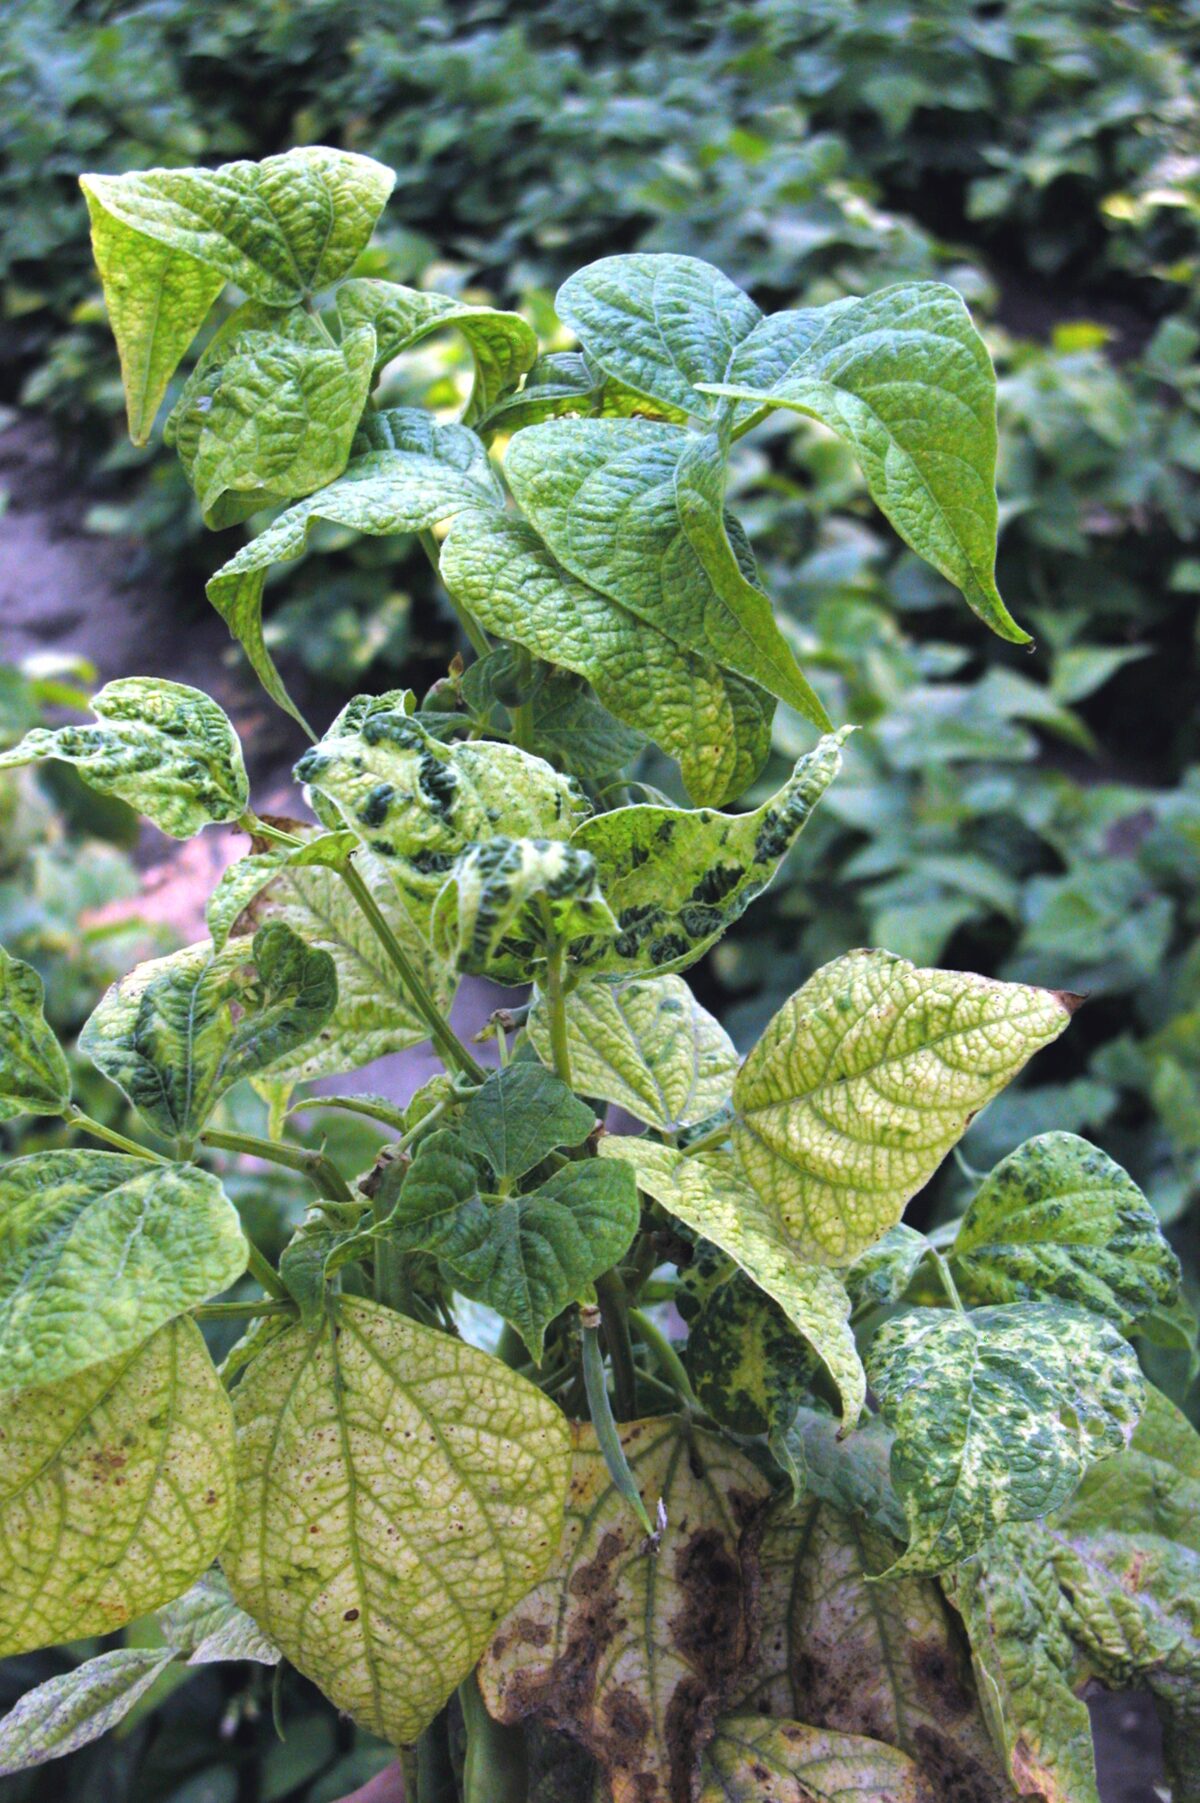 A genetic chimera dry bean plant showing symptoms of Bean Common Mosaic Virus (BCMV) in which the puckered leaves are a mosaic of yellow, green and dark green colours